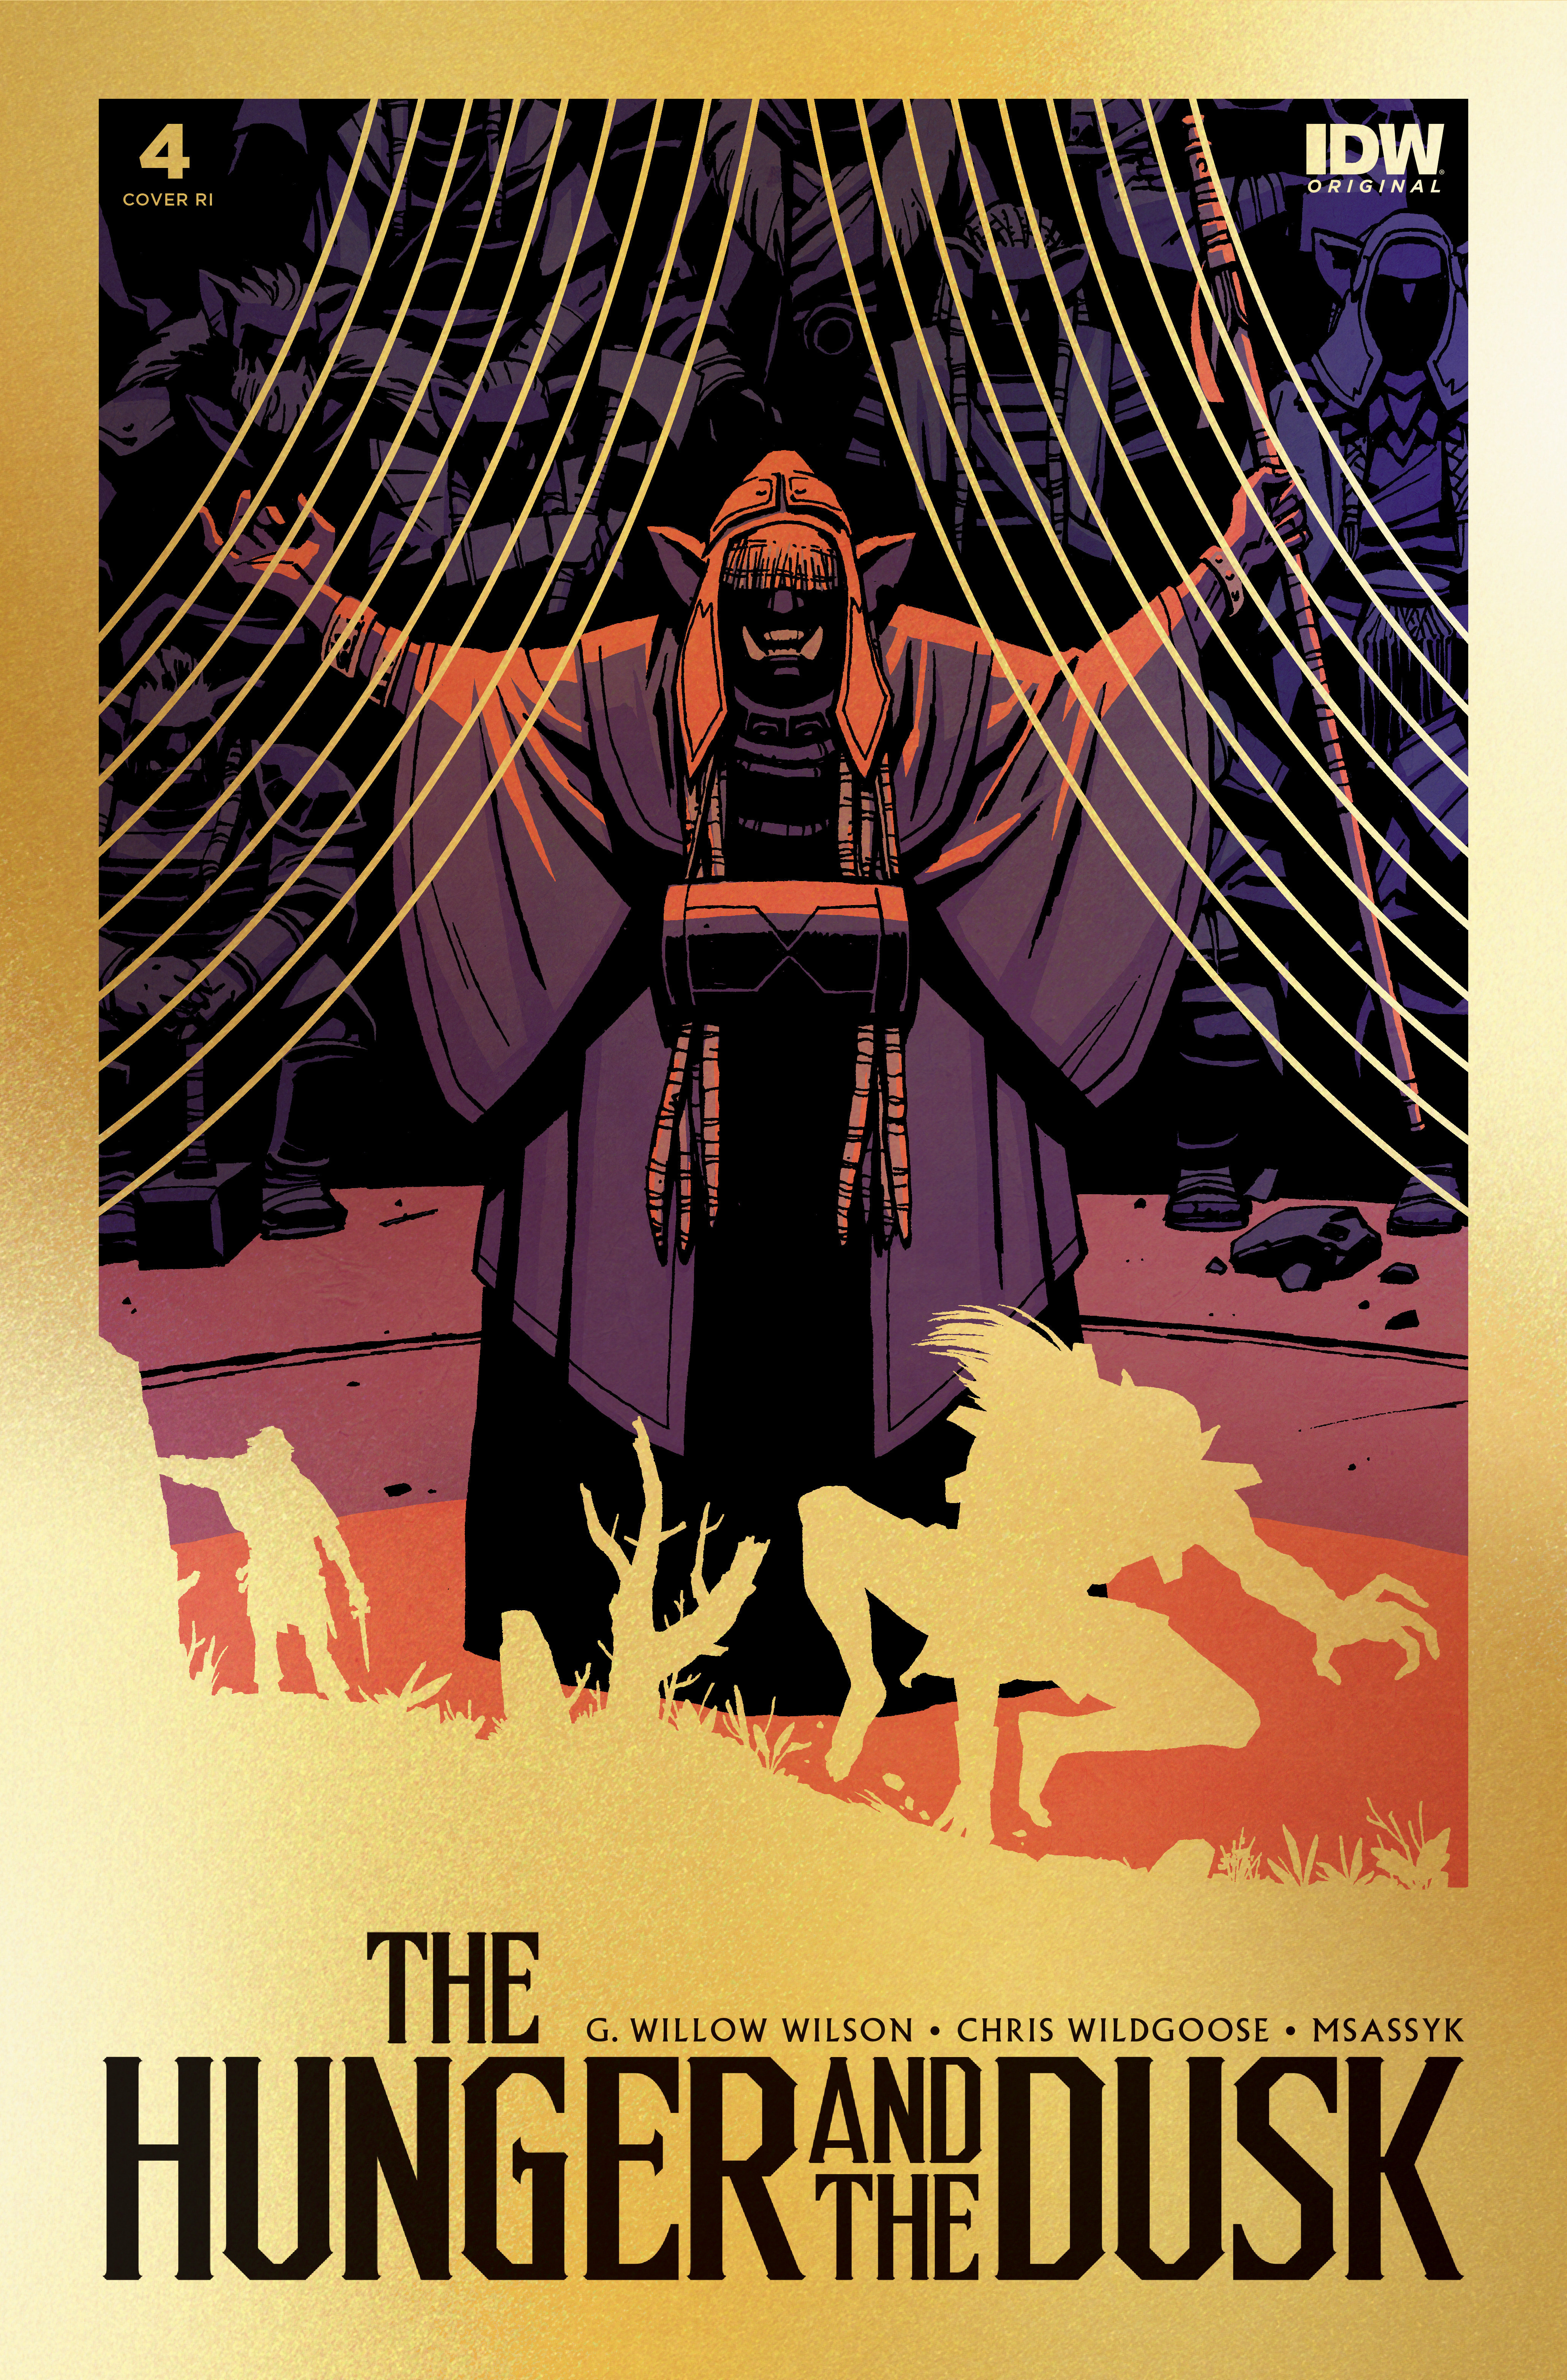 Hunger and the Dusk #4 Cover Chiang Gold 1 for 50 Incentive